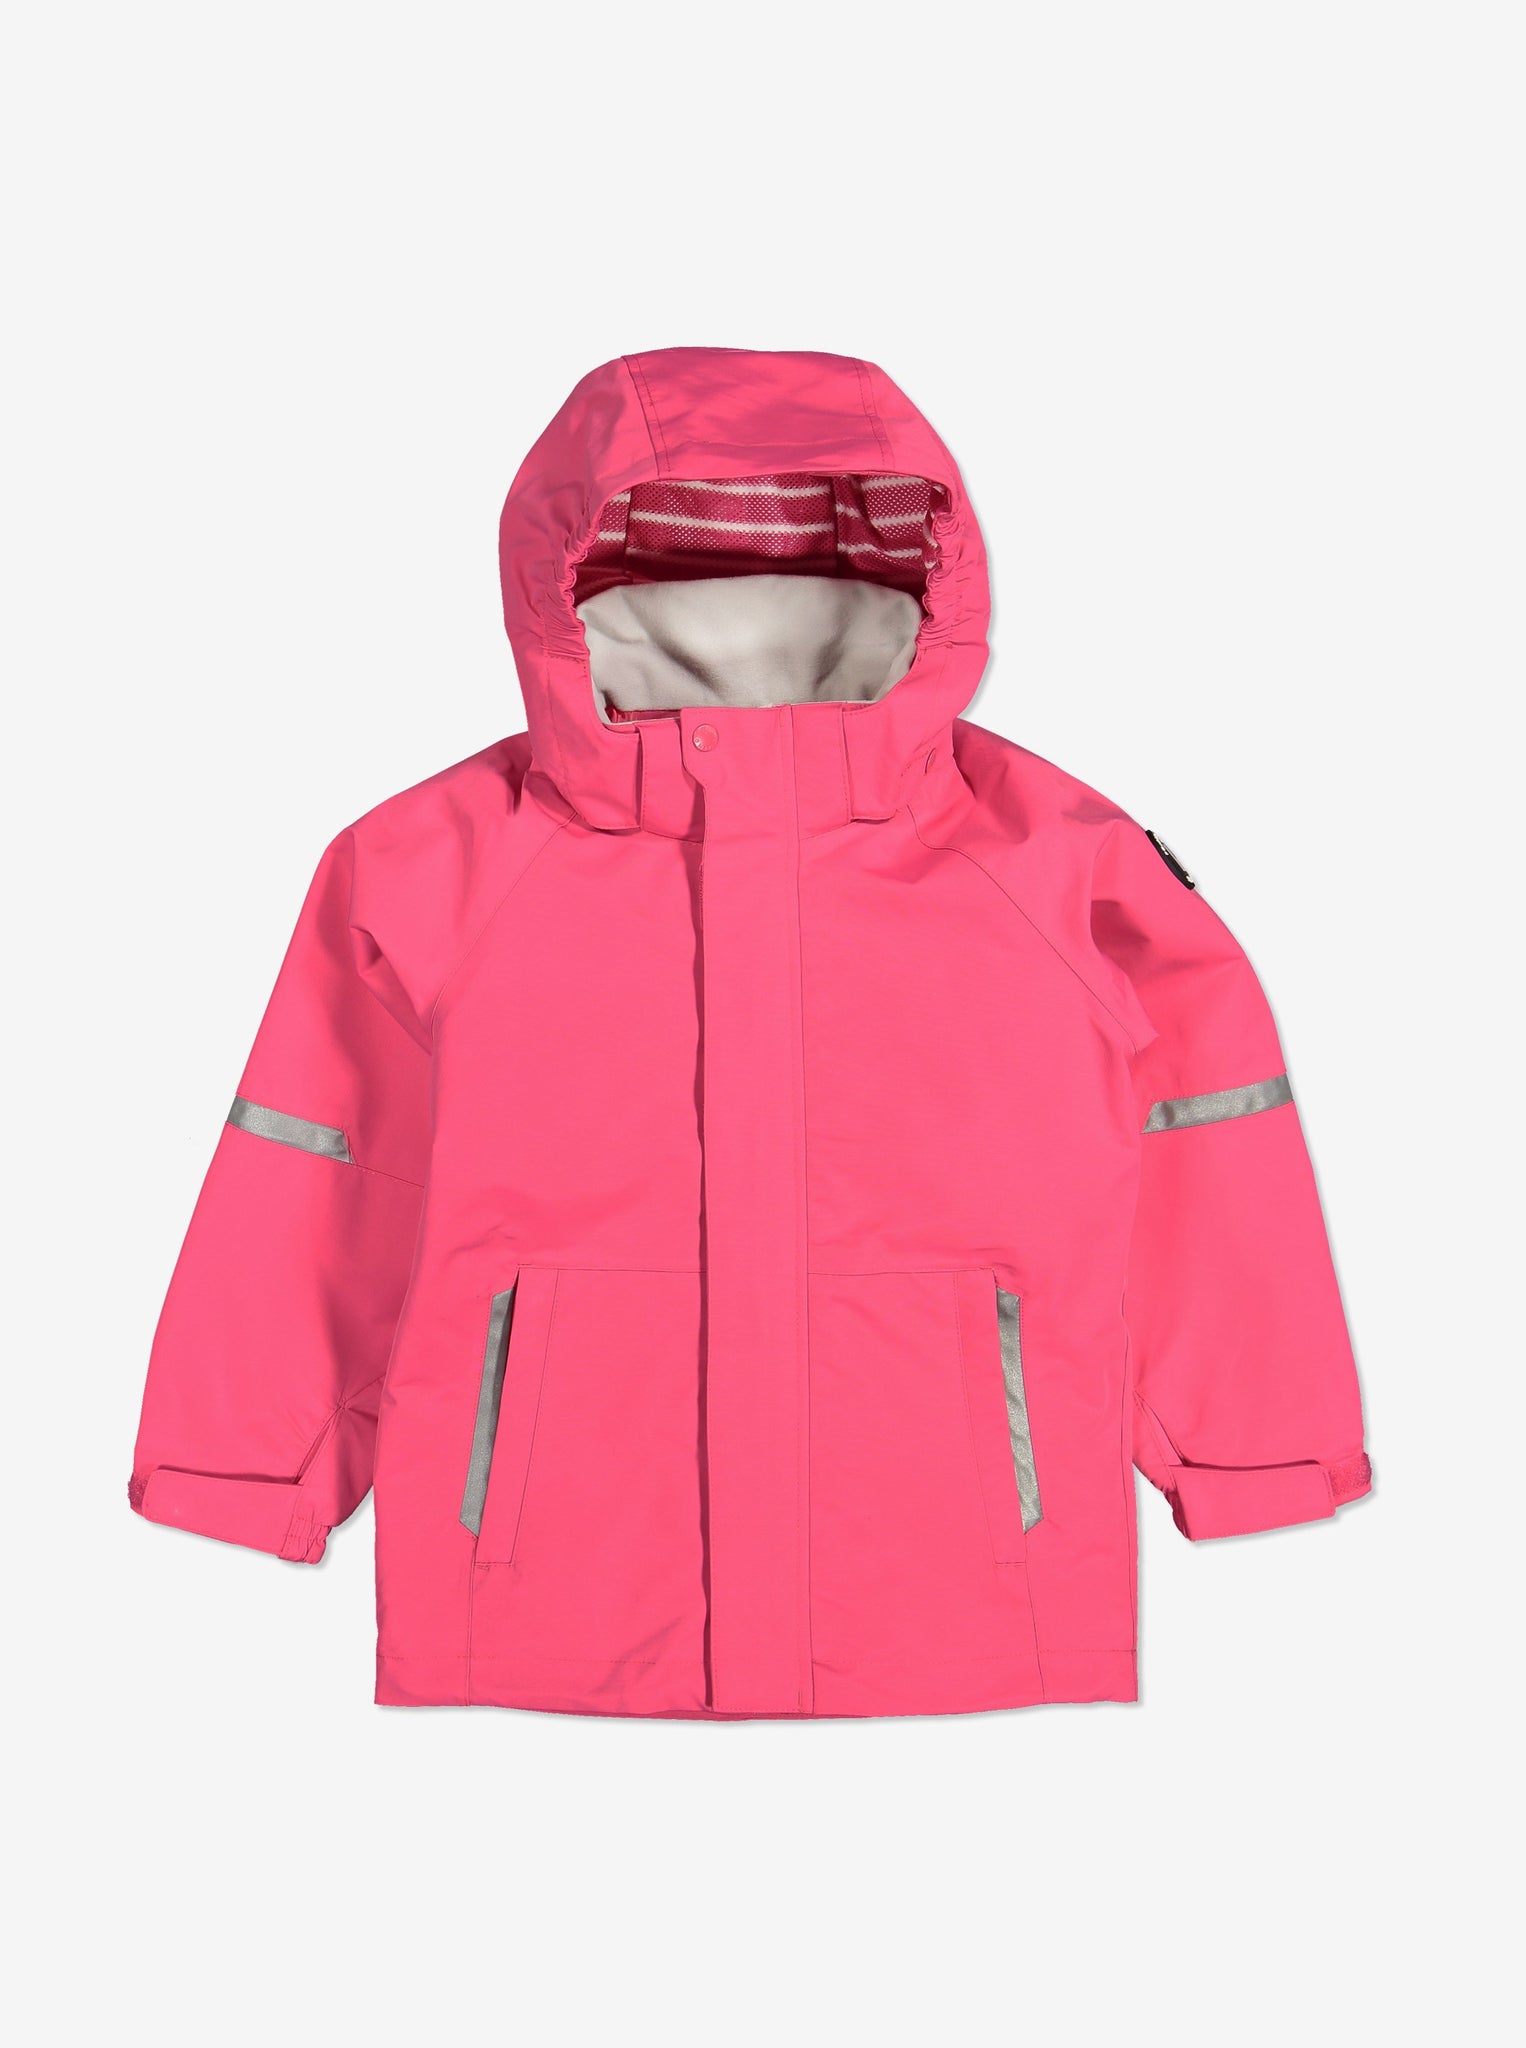 Pink, kids waterproof jacket, with detachable hood, reflectors, adjustable cuffs and front pockets, made of shell fabric.